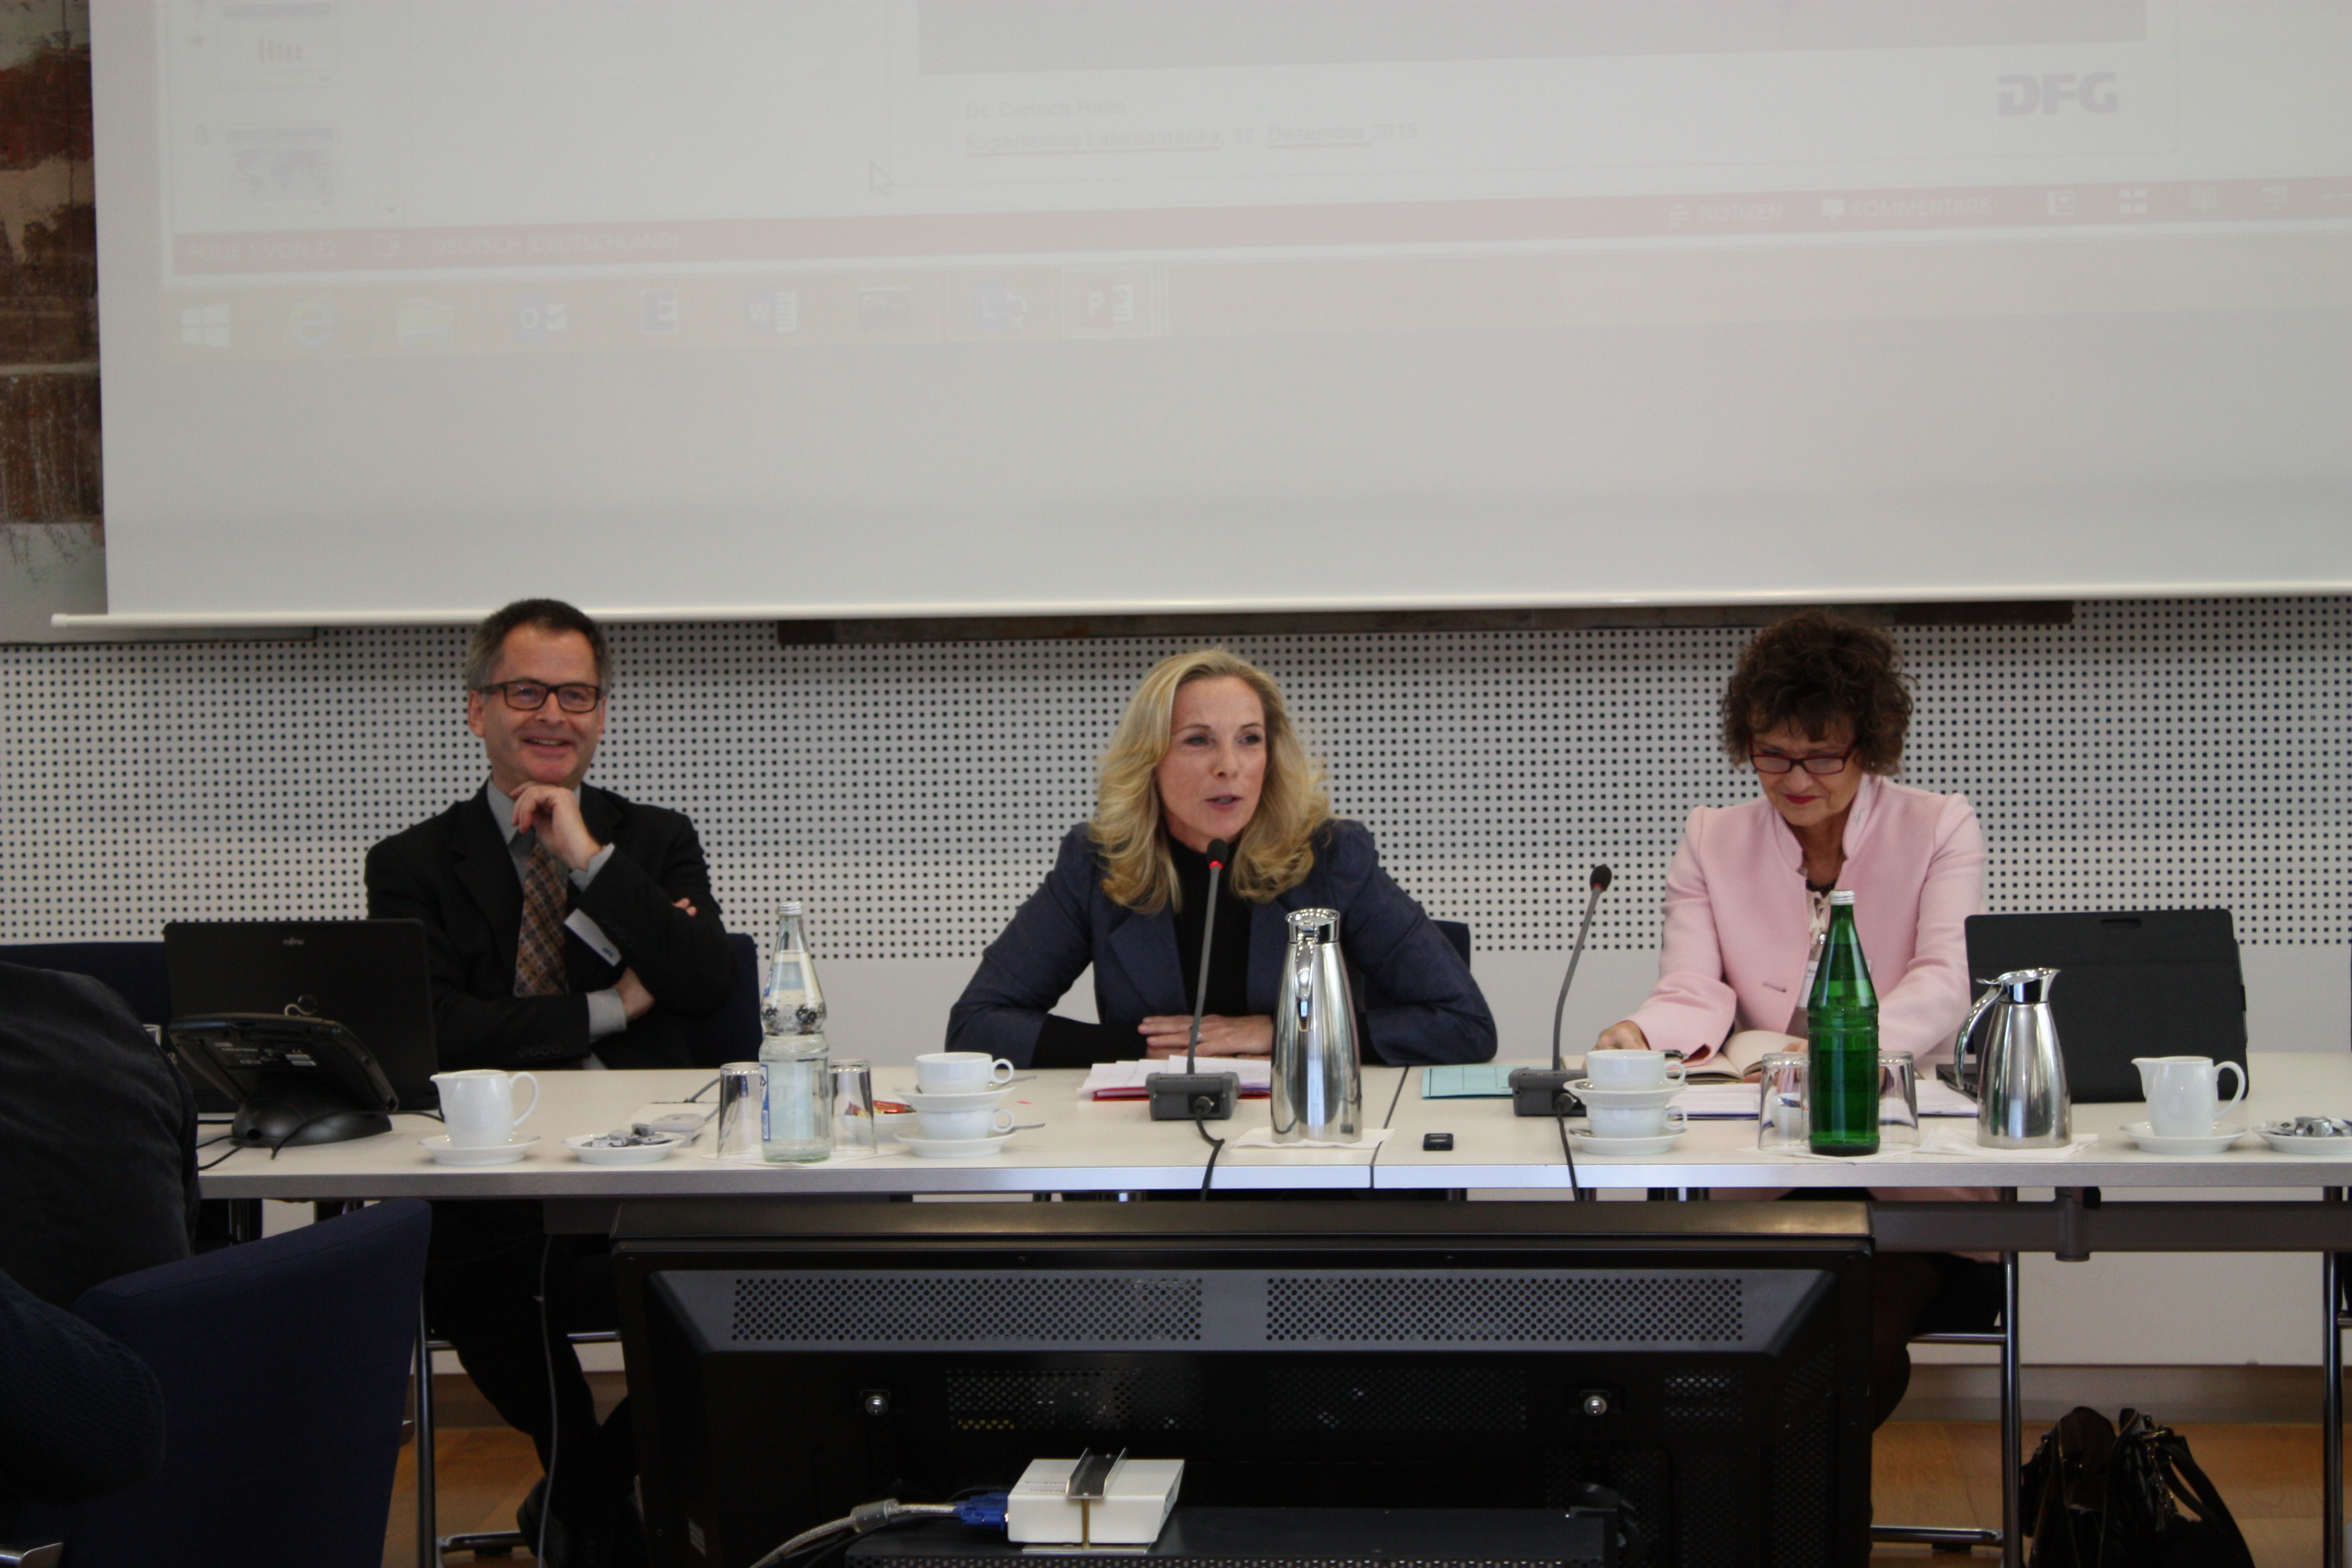 Left to right: Dietrich Halm, head of the section for international cooperation with Latin America, Dorothee Dzwonnek, Secretary General of the DFG, and Annette Schmidtmann, head of the Scientific Affairs department